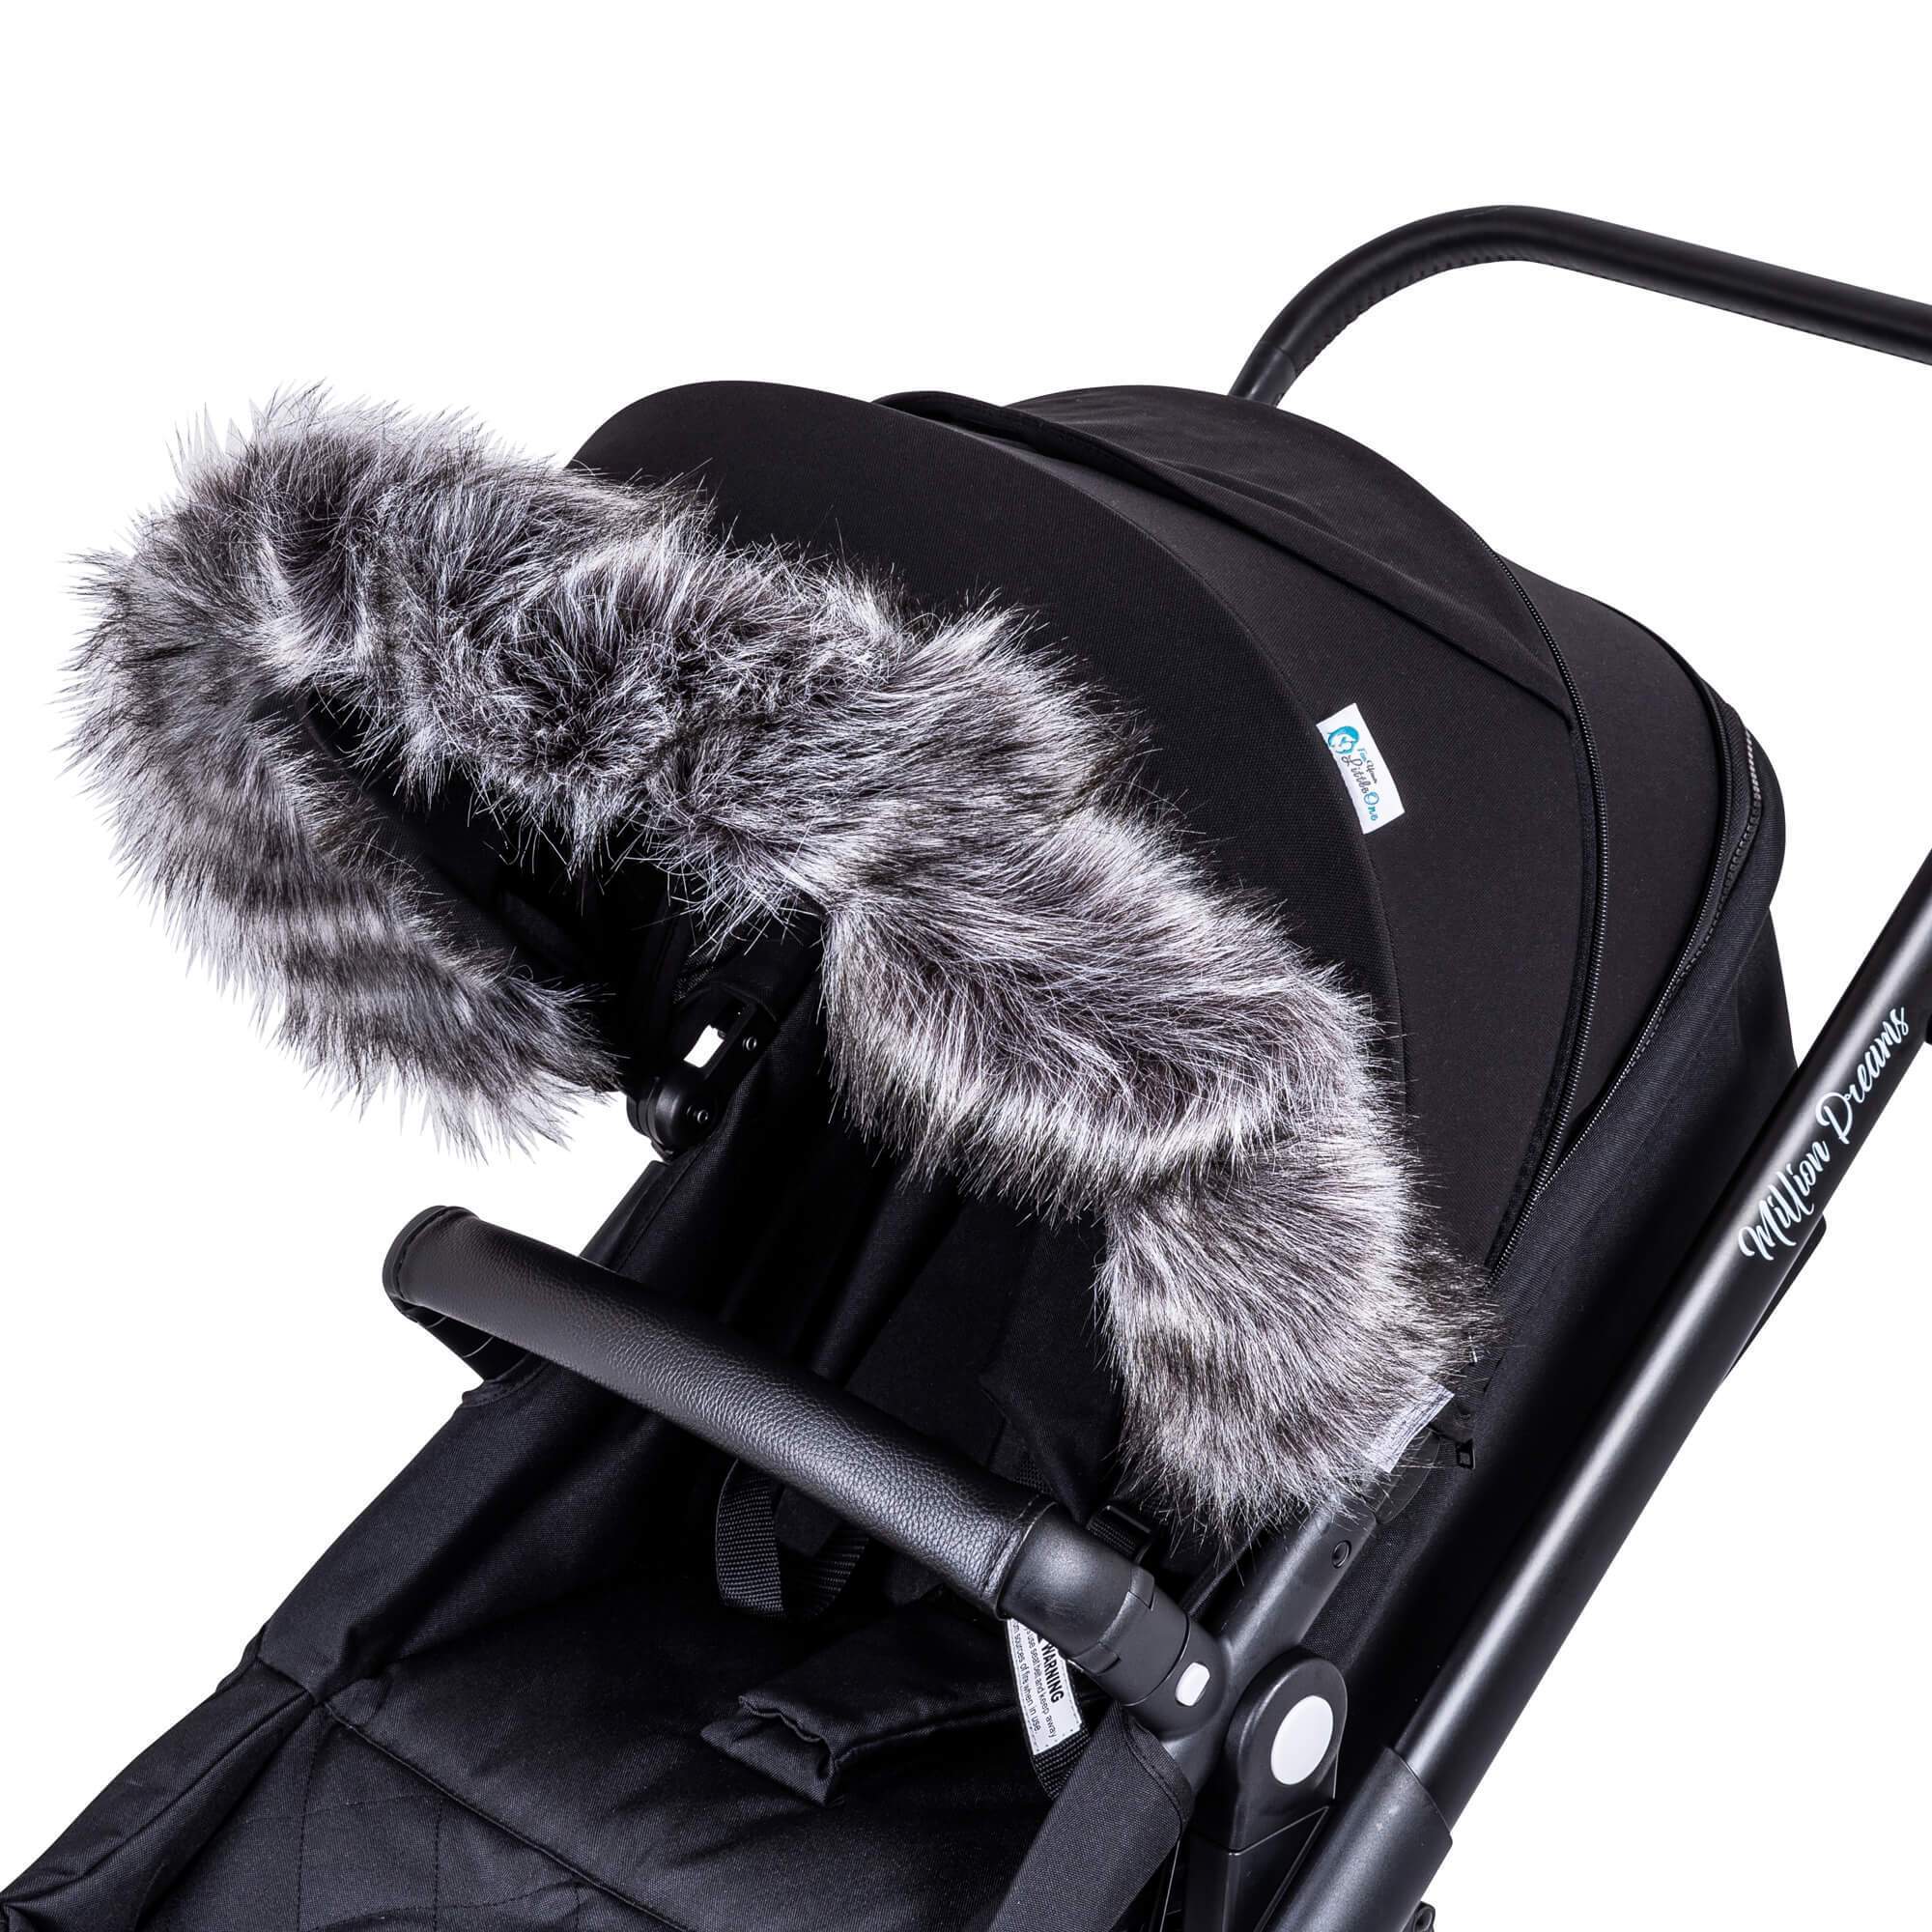 Pram Fur Hood Trim Attachment for Pushchair Compatible with Egg - For Your Little One